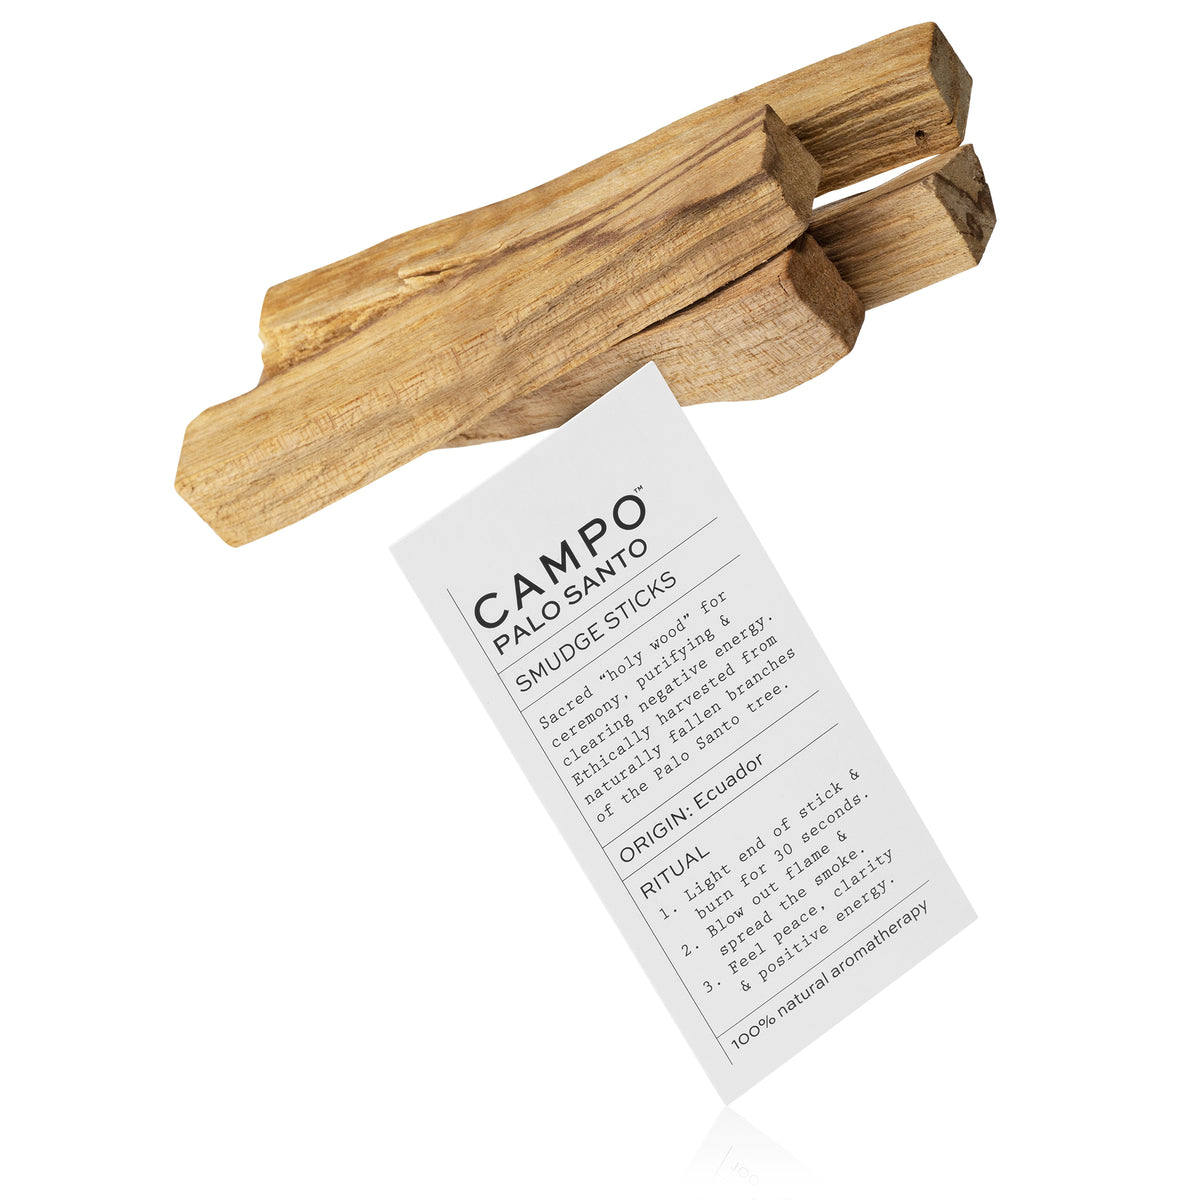 A sacred aromatic &quot;holy wood&quot; used for centuries as a spiritual remedy to cleanse, purify &amp; clear negative energy.   Ethically harvested from naturally fallen branches of the Palo Santo tree. It has a fine citrus aroma with underlying notes of frankincense.